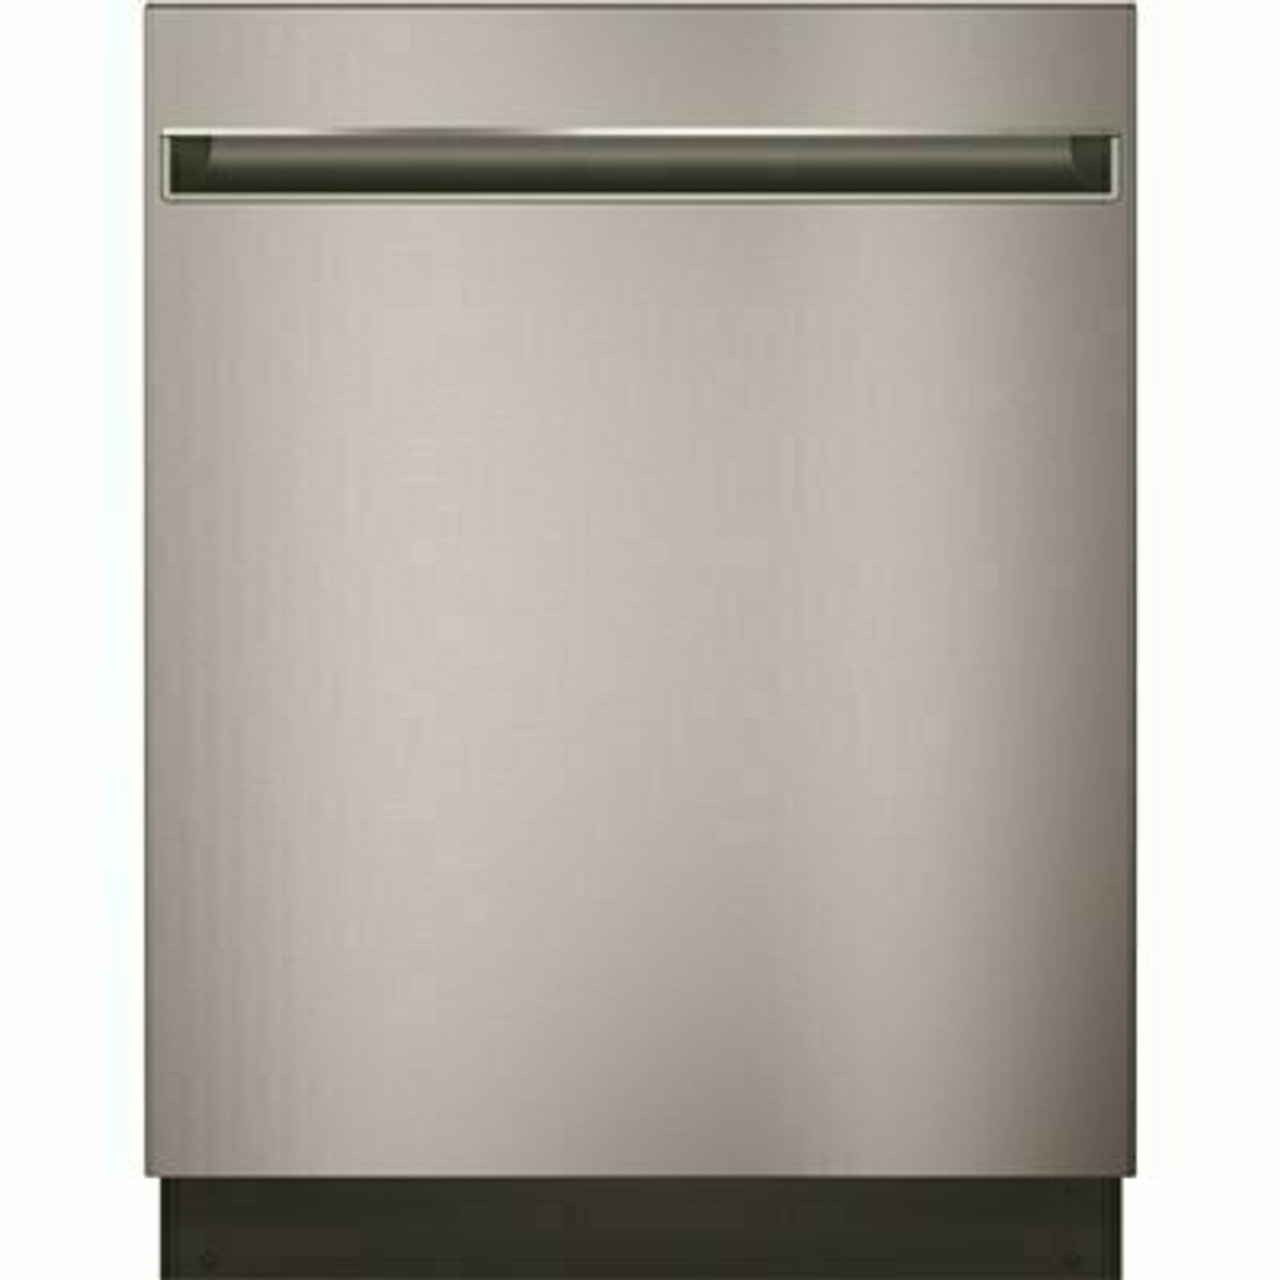 Ge 24 In. Stainless Steel Top Control Smart Dishwasher 120-Volt With Stainless Steel Tub And 51 Dba